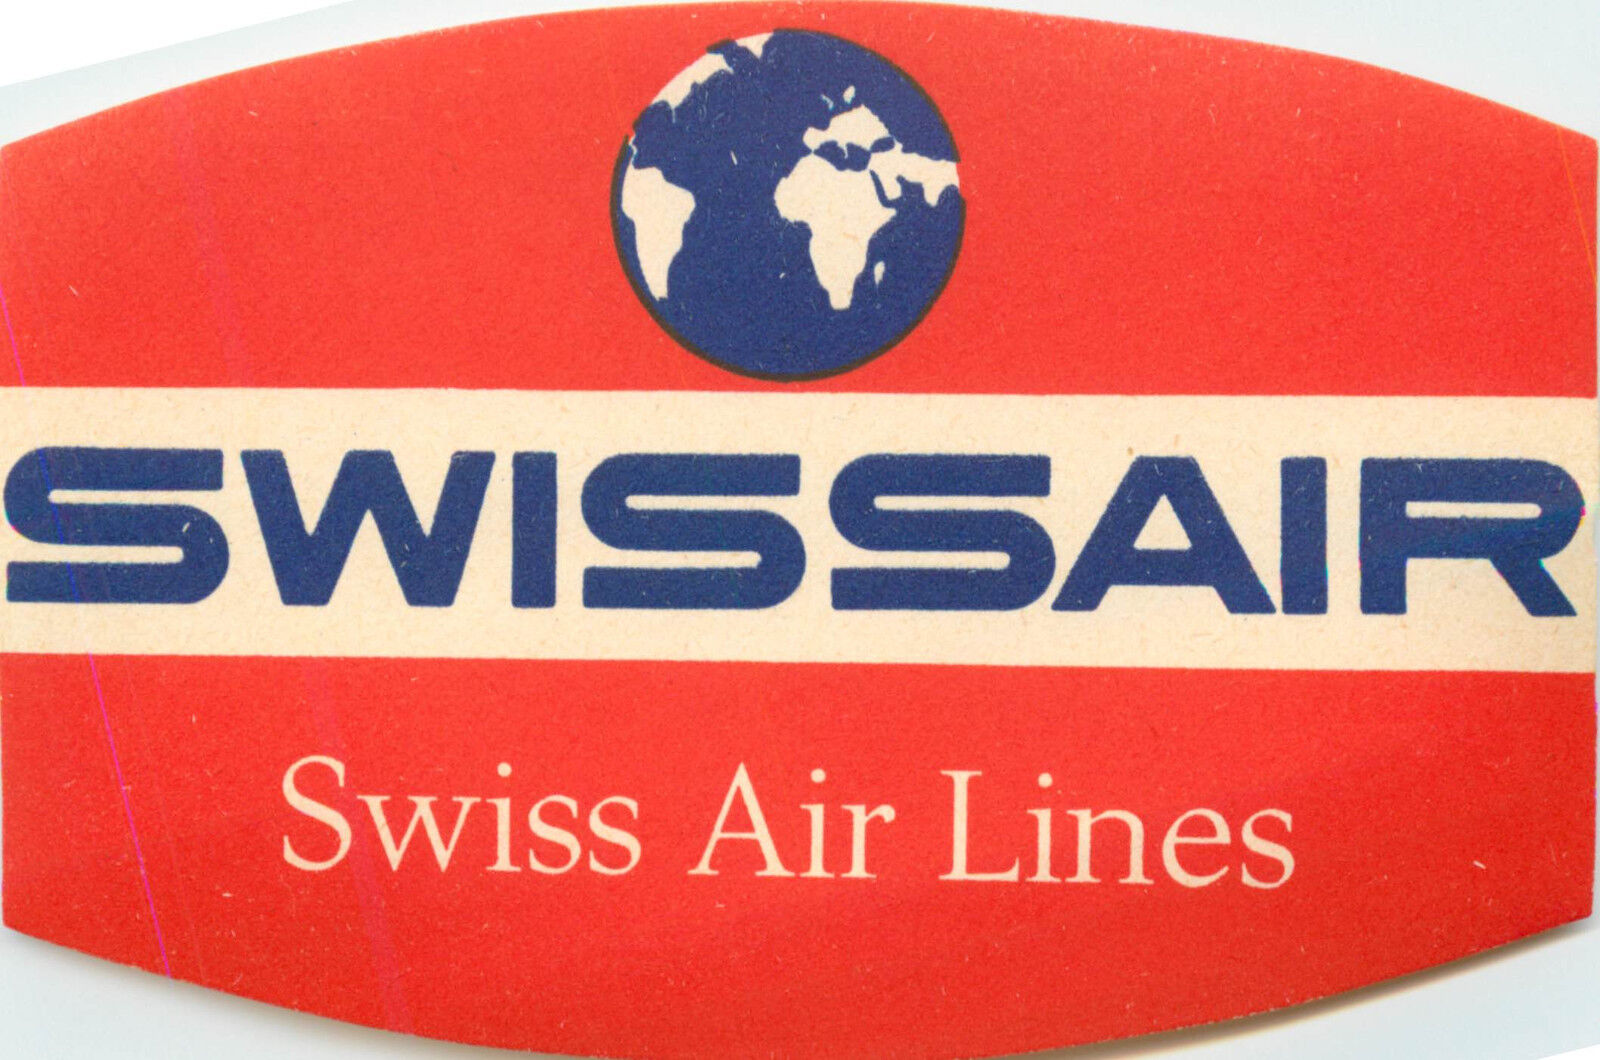 SWISSAIR ~SWISS AIRLINES~ Great Old Luggage Label, MINT CONDITION - c. 1955